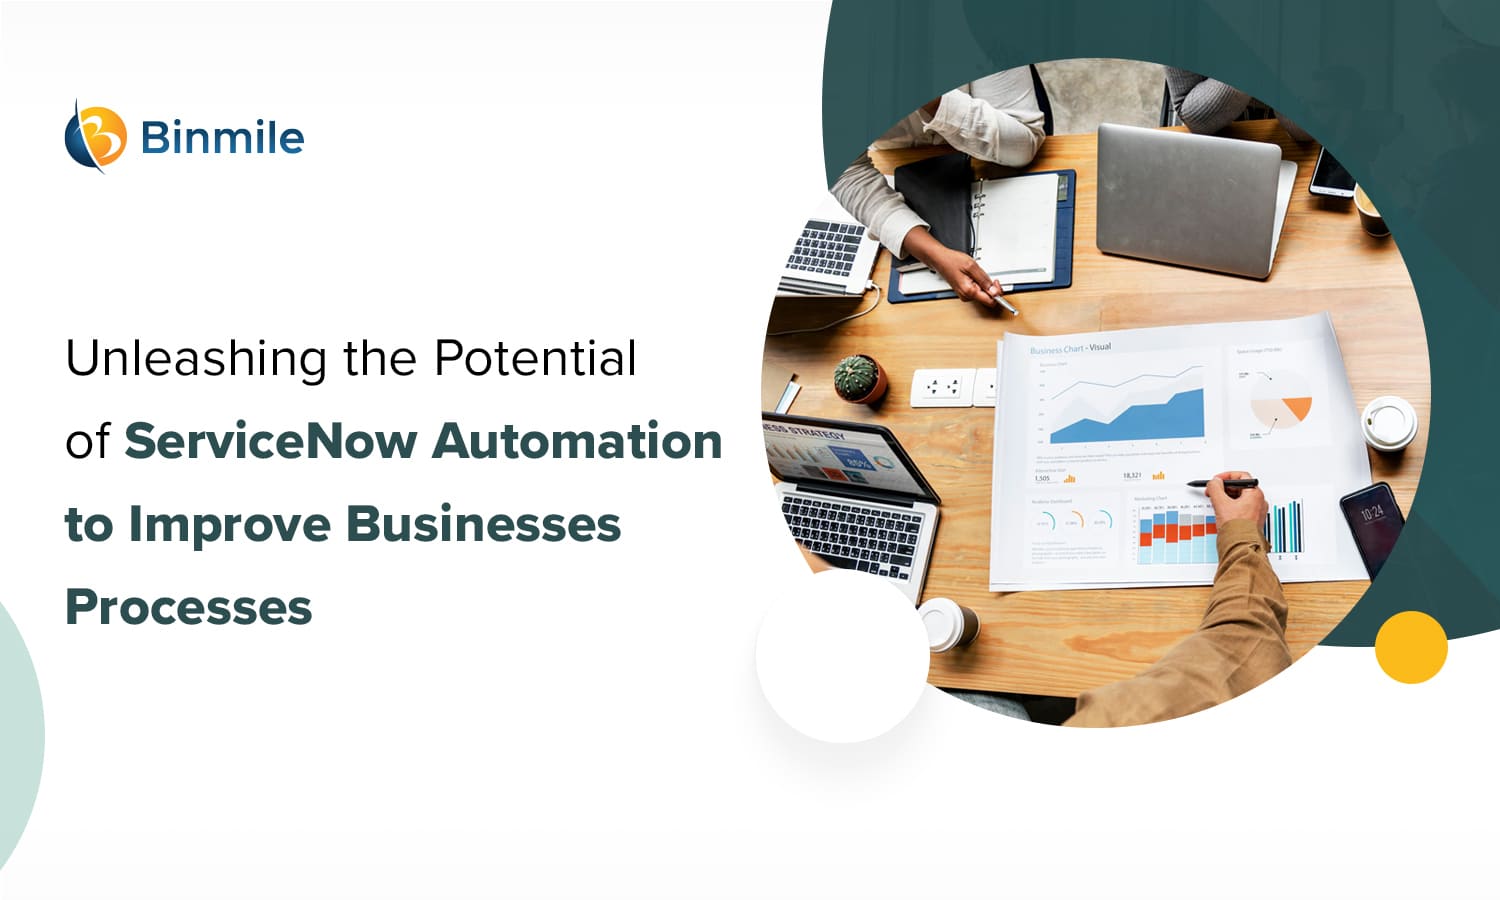 Unleashing the Potential of ServiceNow Automation